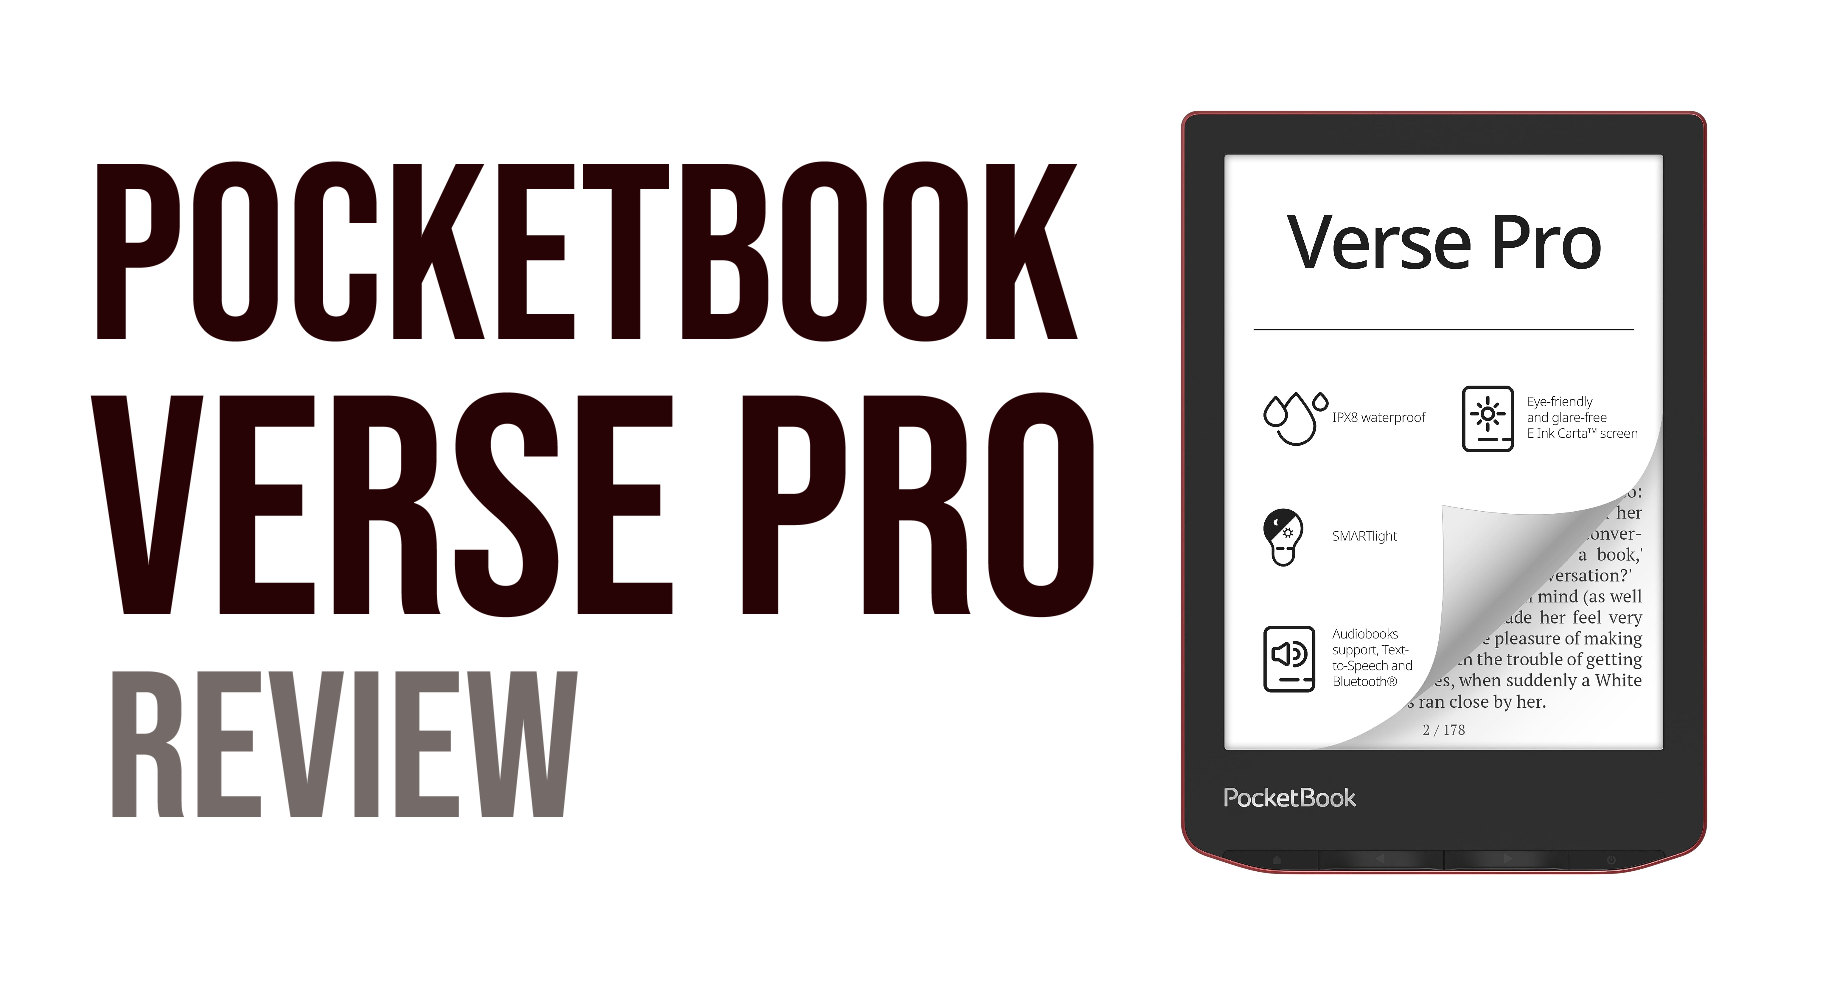 pocketbook verse pro review